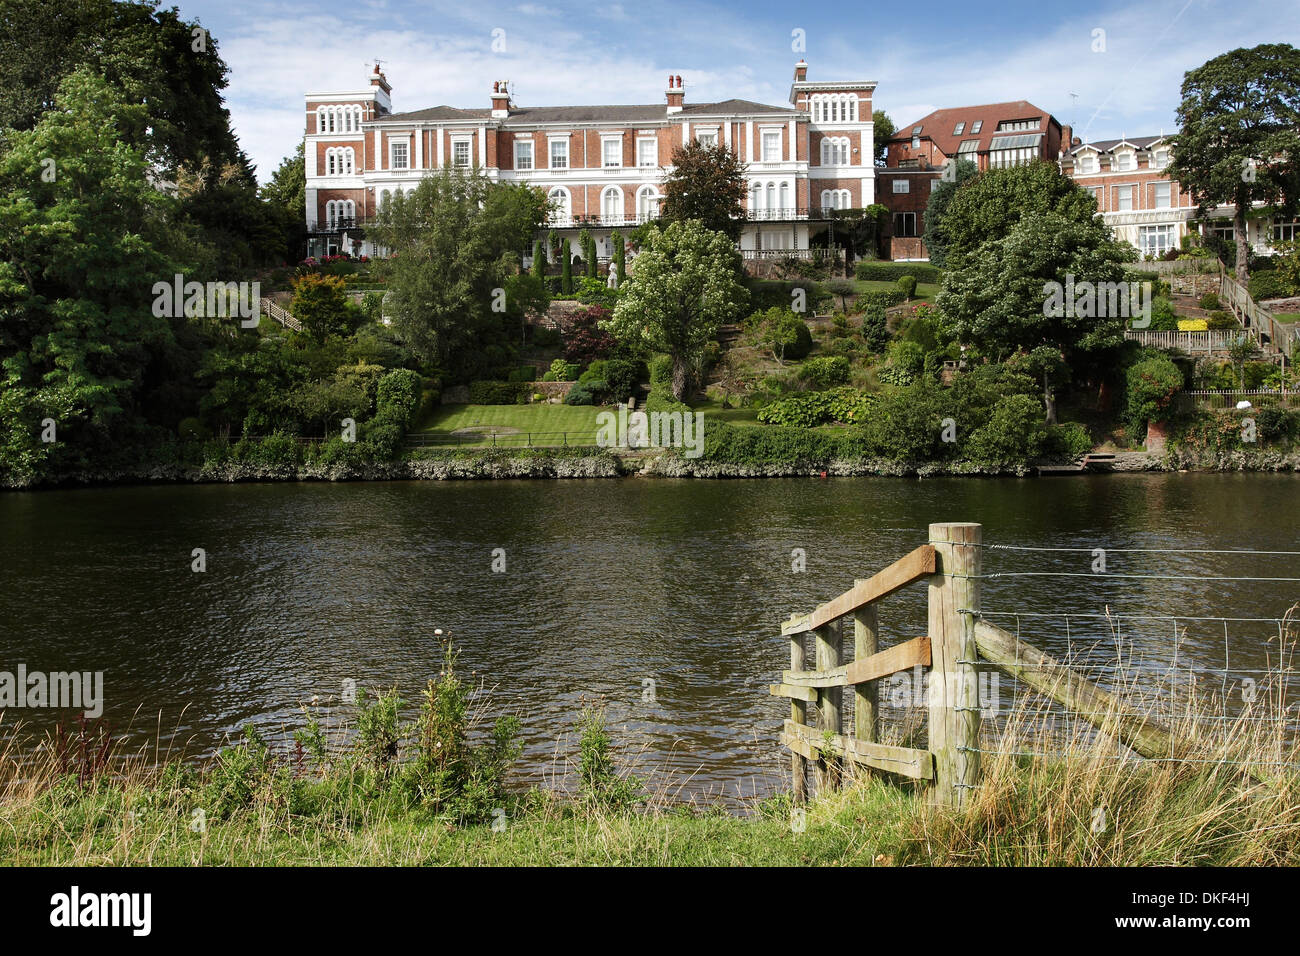 The River Dee at Chester, England, showing large riverside properties with waterfront gardens. Stock Photo